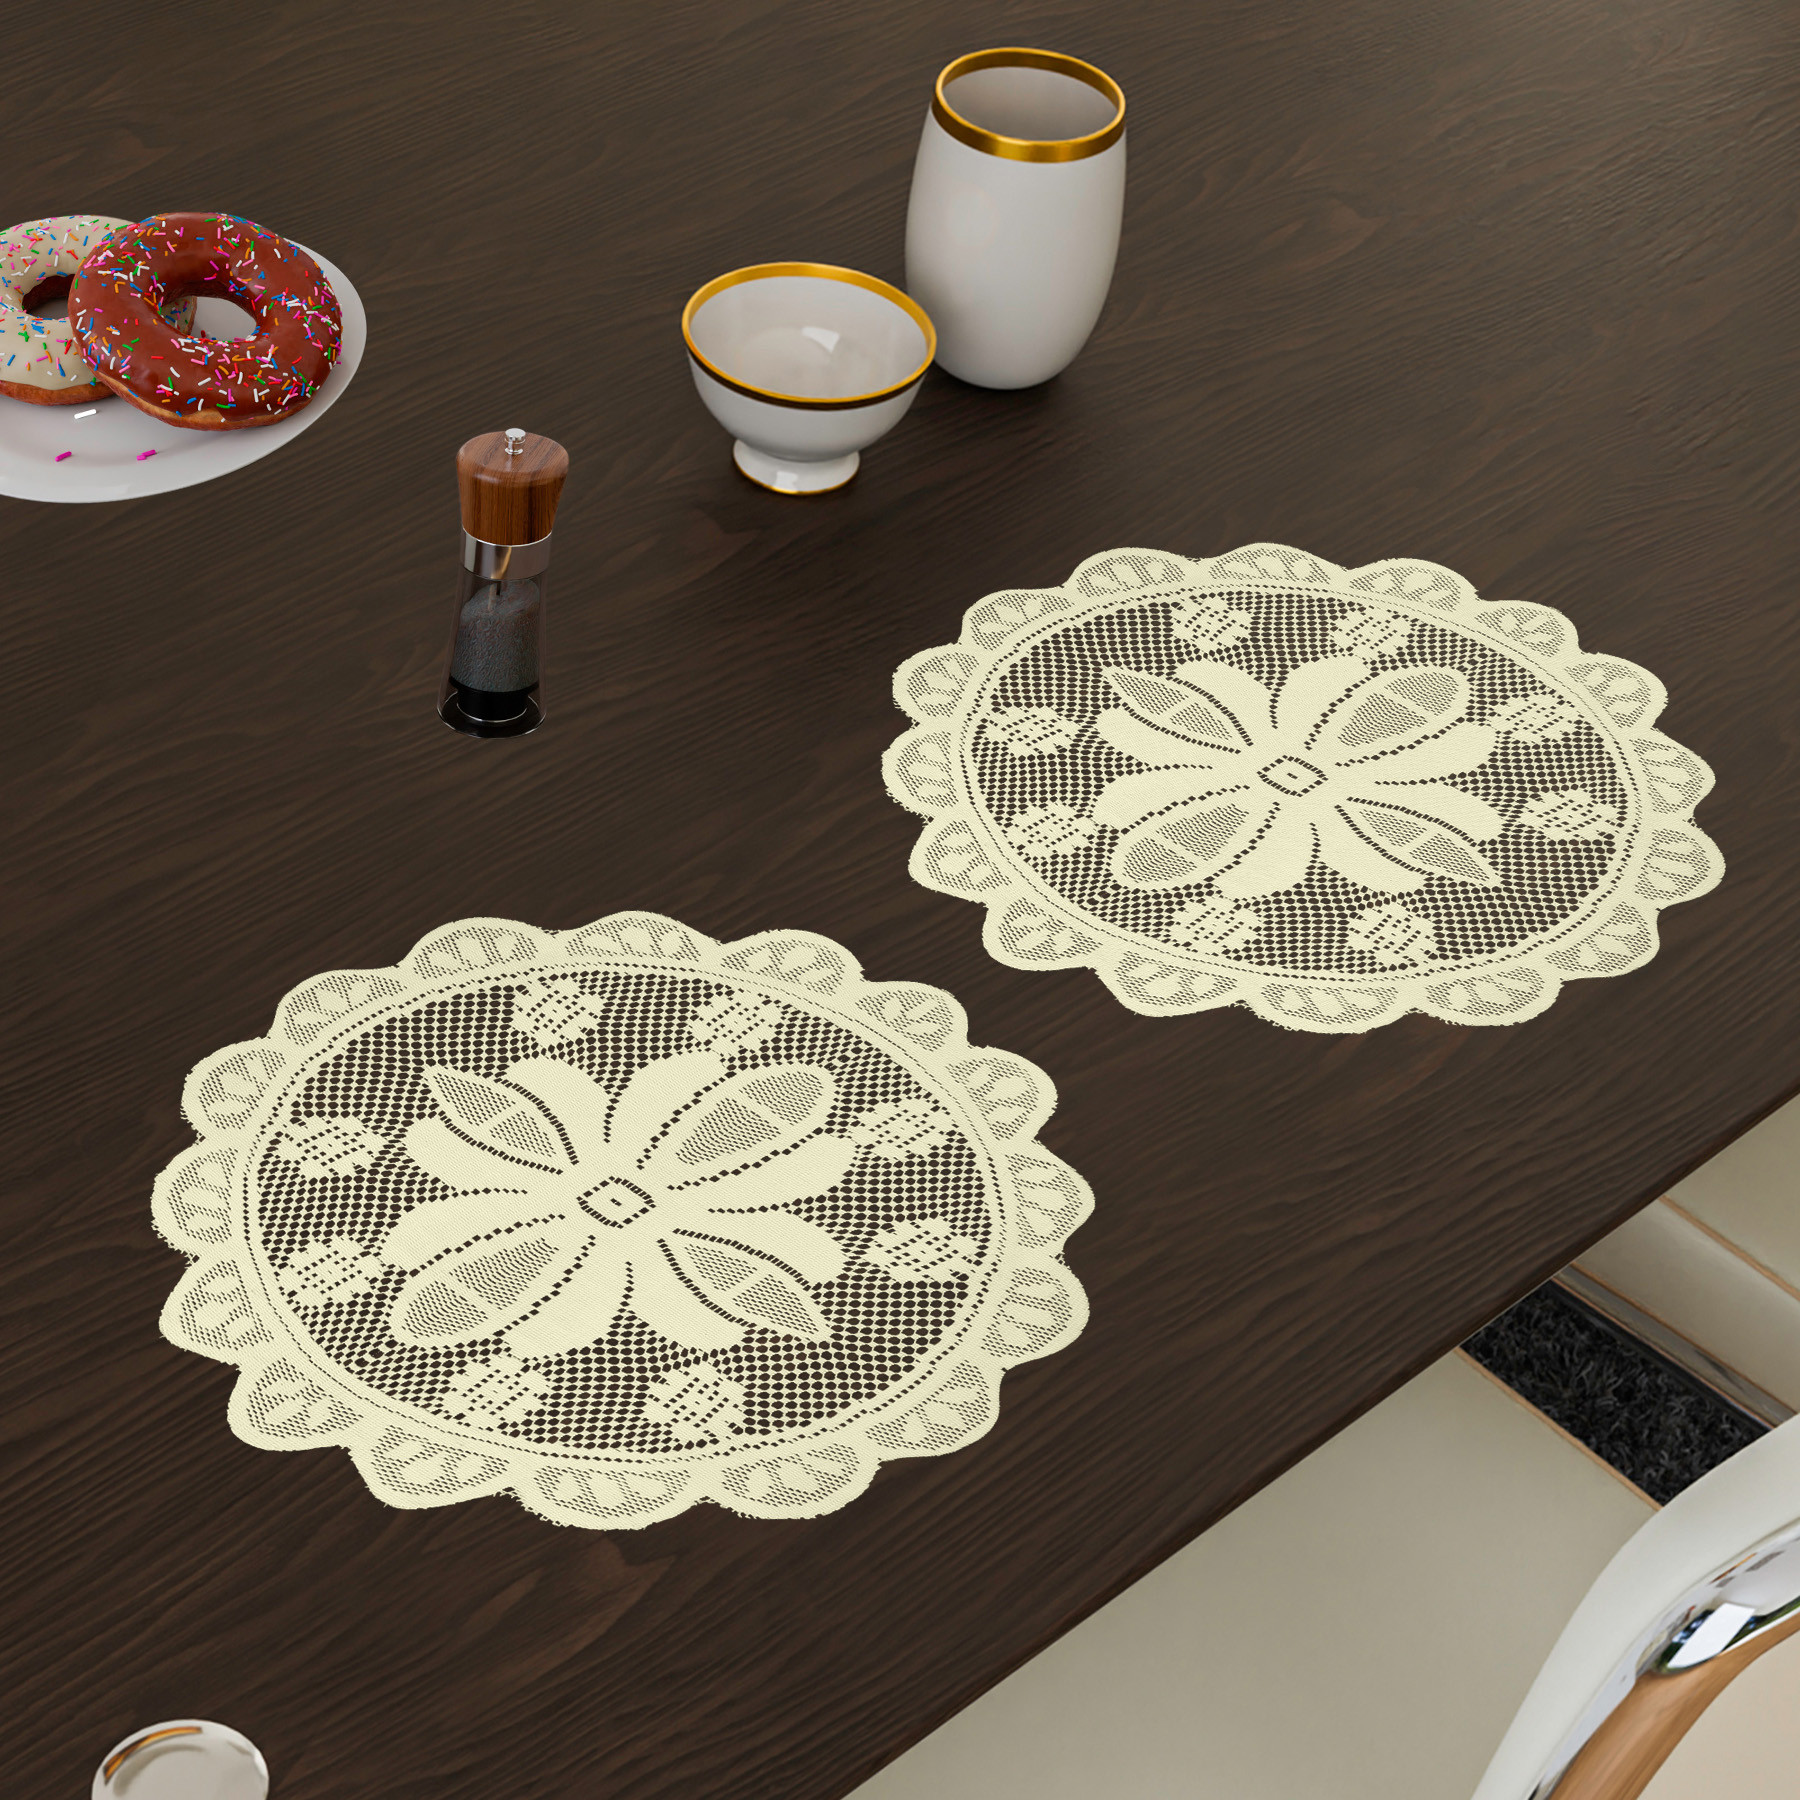 Kuber Industries Placemat | Dining Table Placemat | Center Table Mats | Round Plain Net Placemat Set | Side Table Placemats for Hotel-Home Décor | 20 Inch |Cream